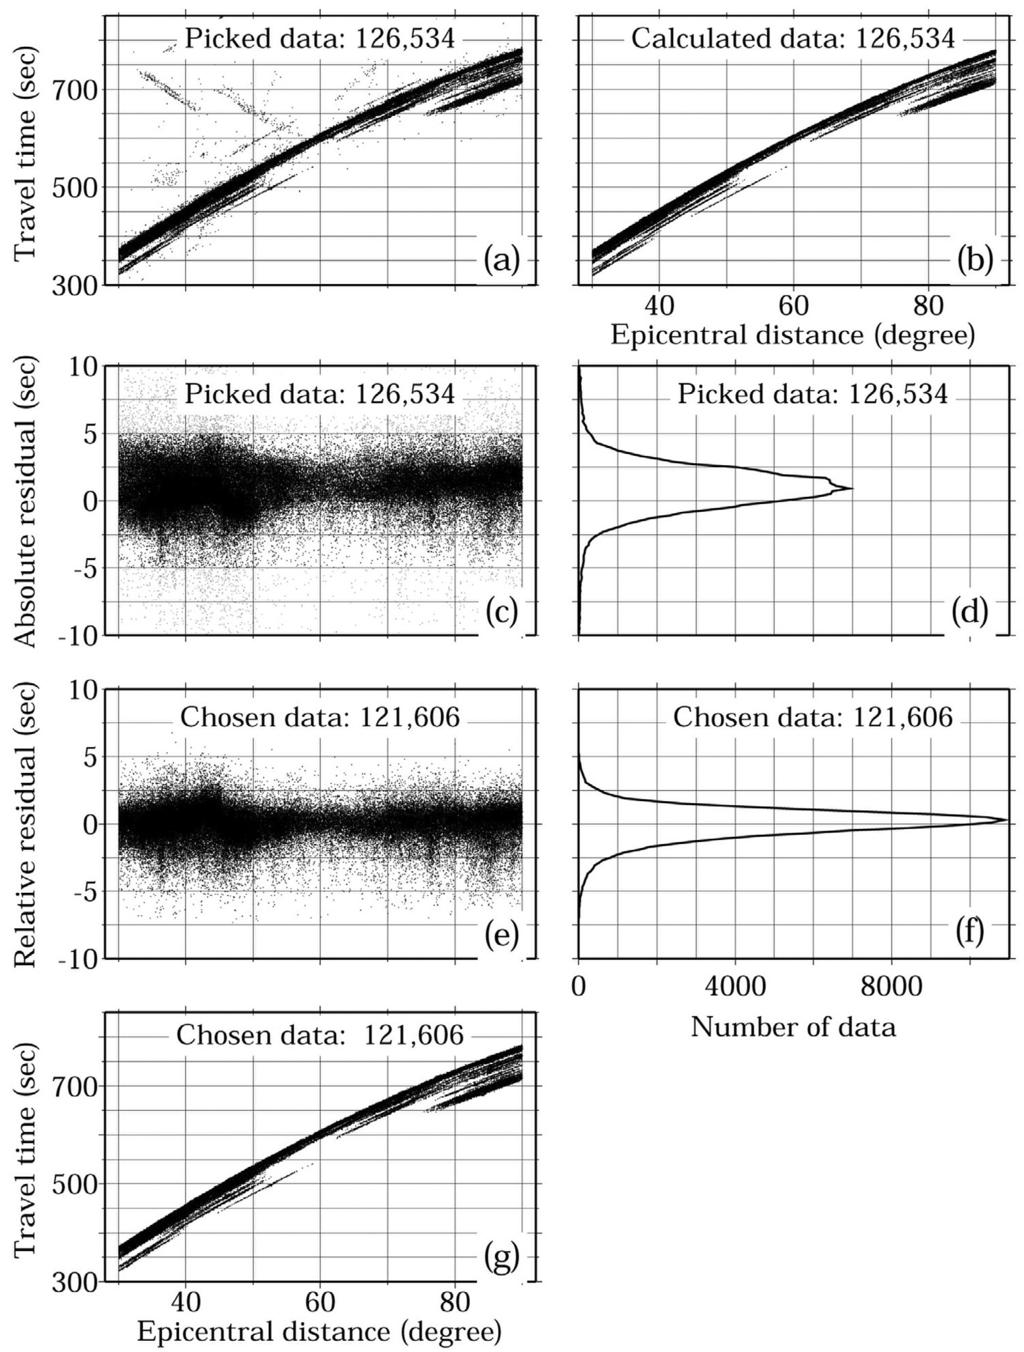 Figure 7. (a) Travel times of P wave data hand-picked versus epicentral distance in degrees. (b) The same as Figure 7a but for calculated travel times.